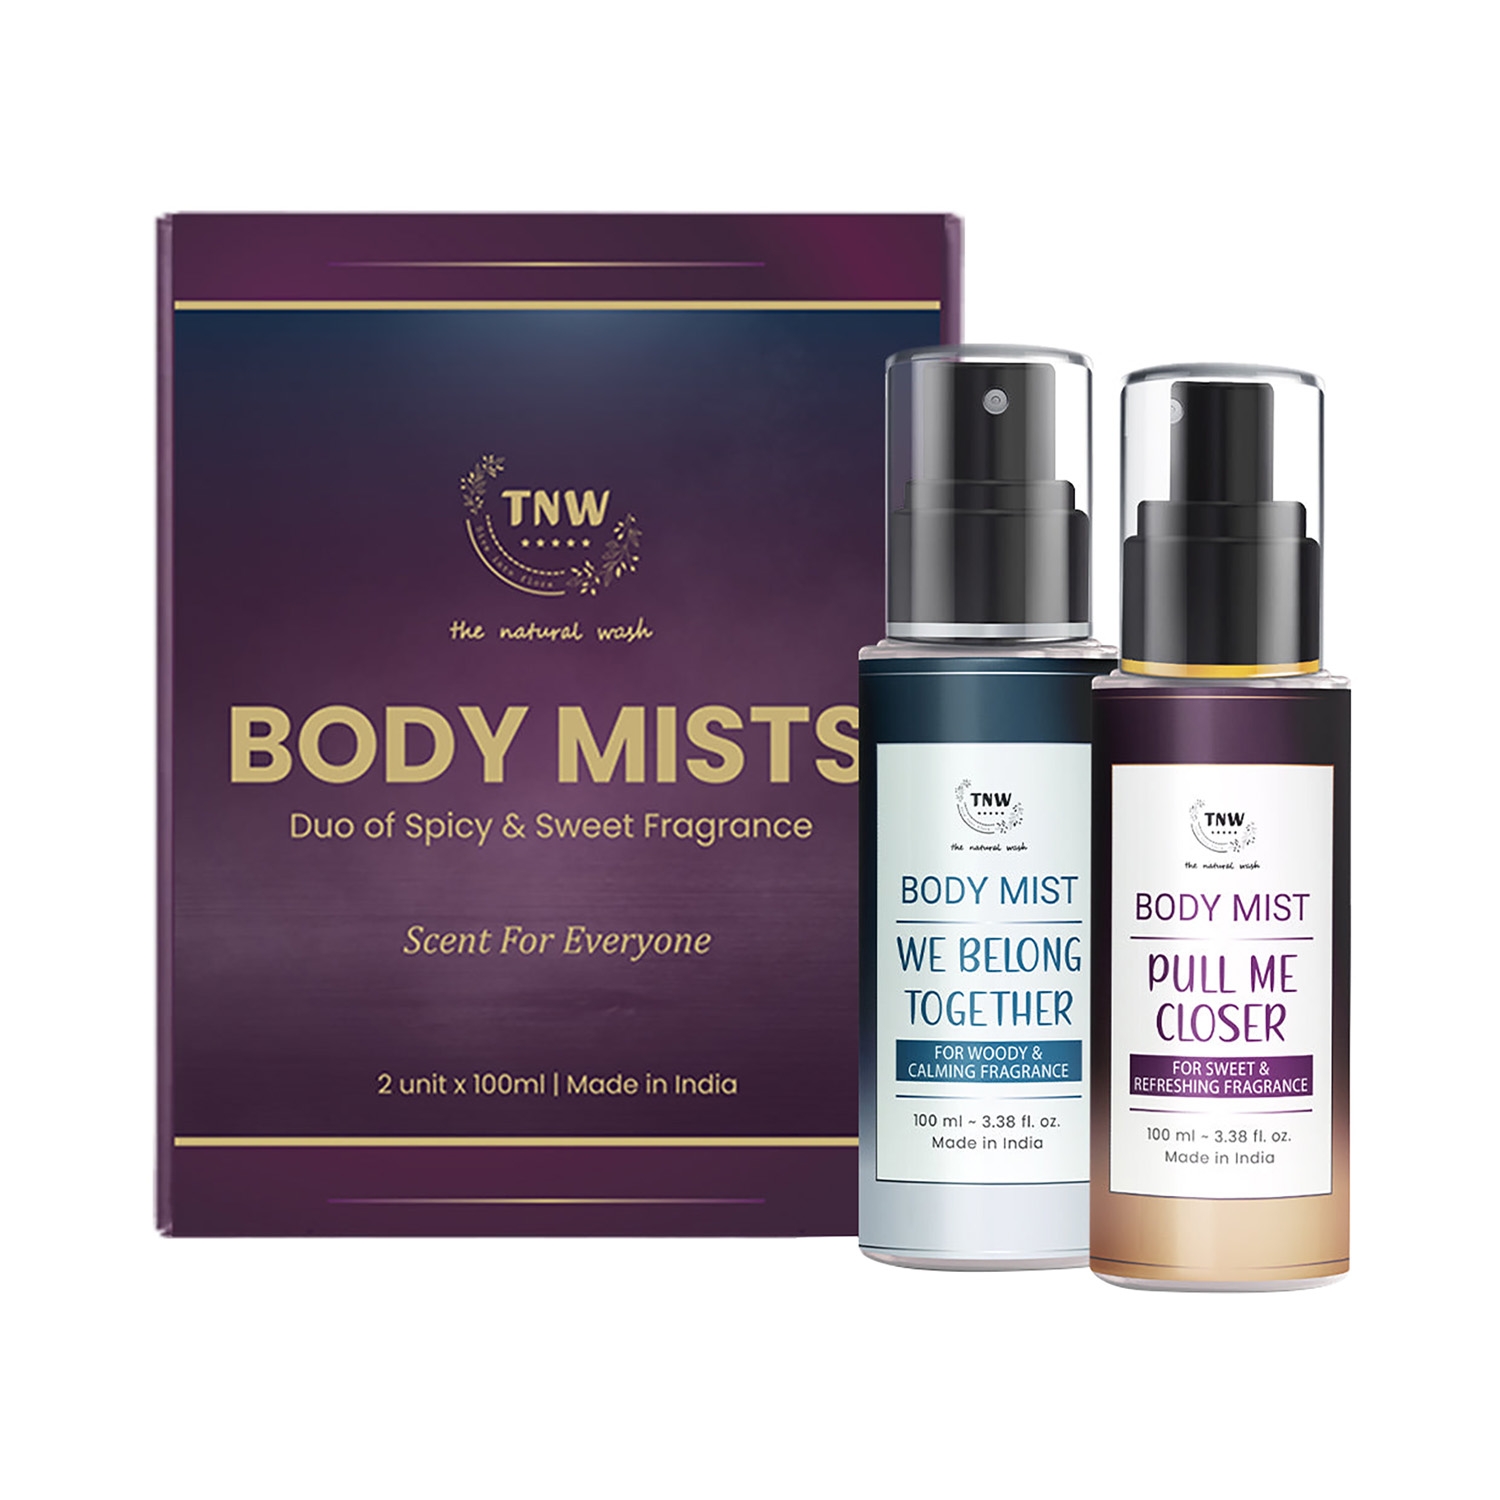 TNW The Natural Wash | TNW The Natural Wash Body Mists Duo Of Sweet & Spicy Fragrance (200ml)